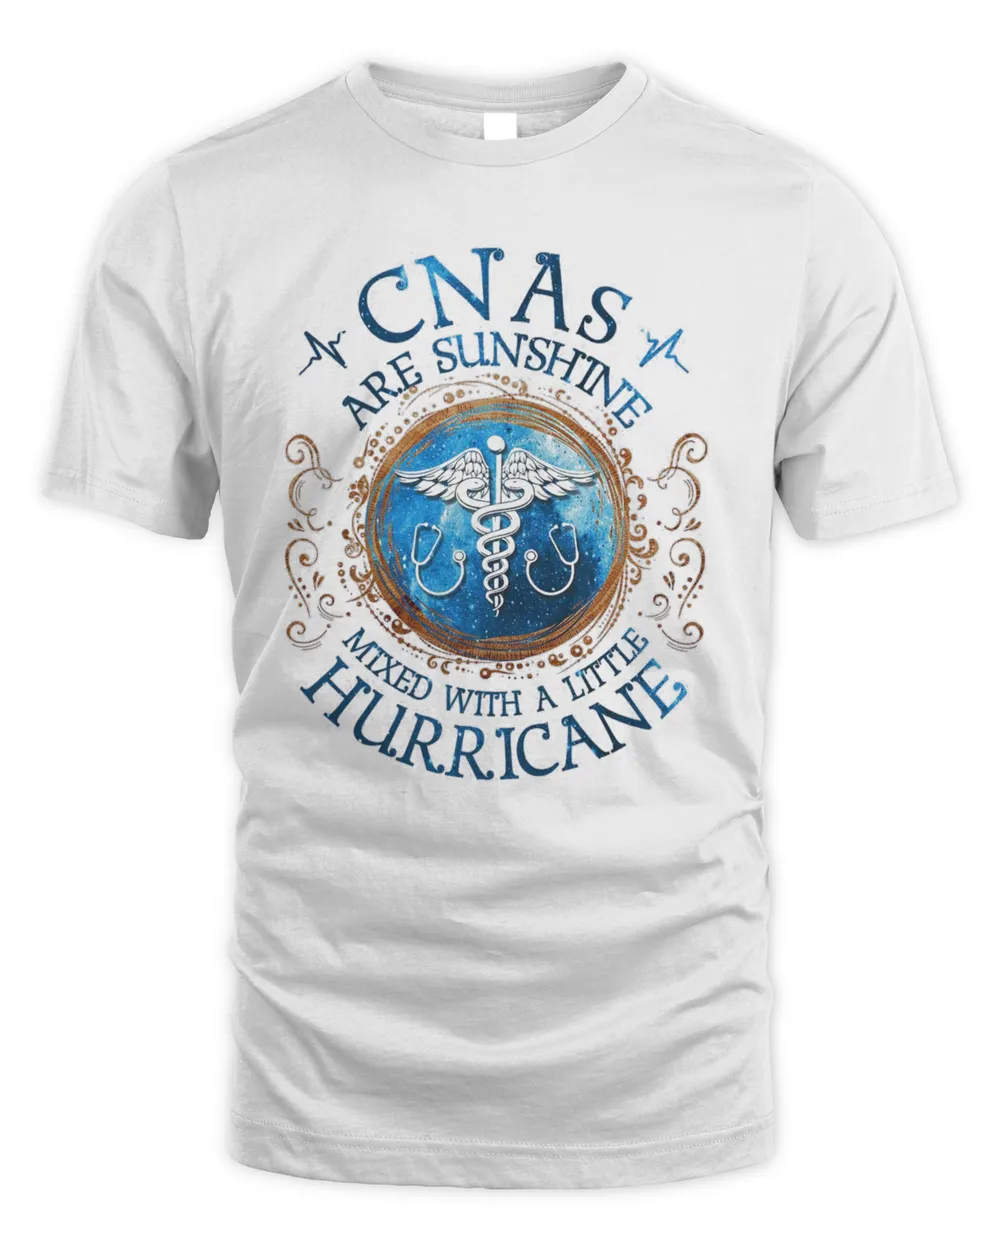 CNAS Are Sunshine Mixed With A Little Hurricane Shirt